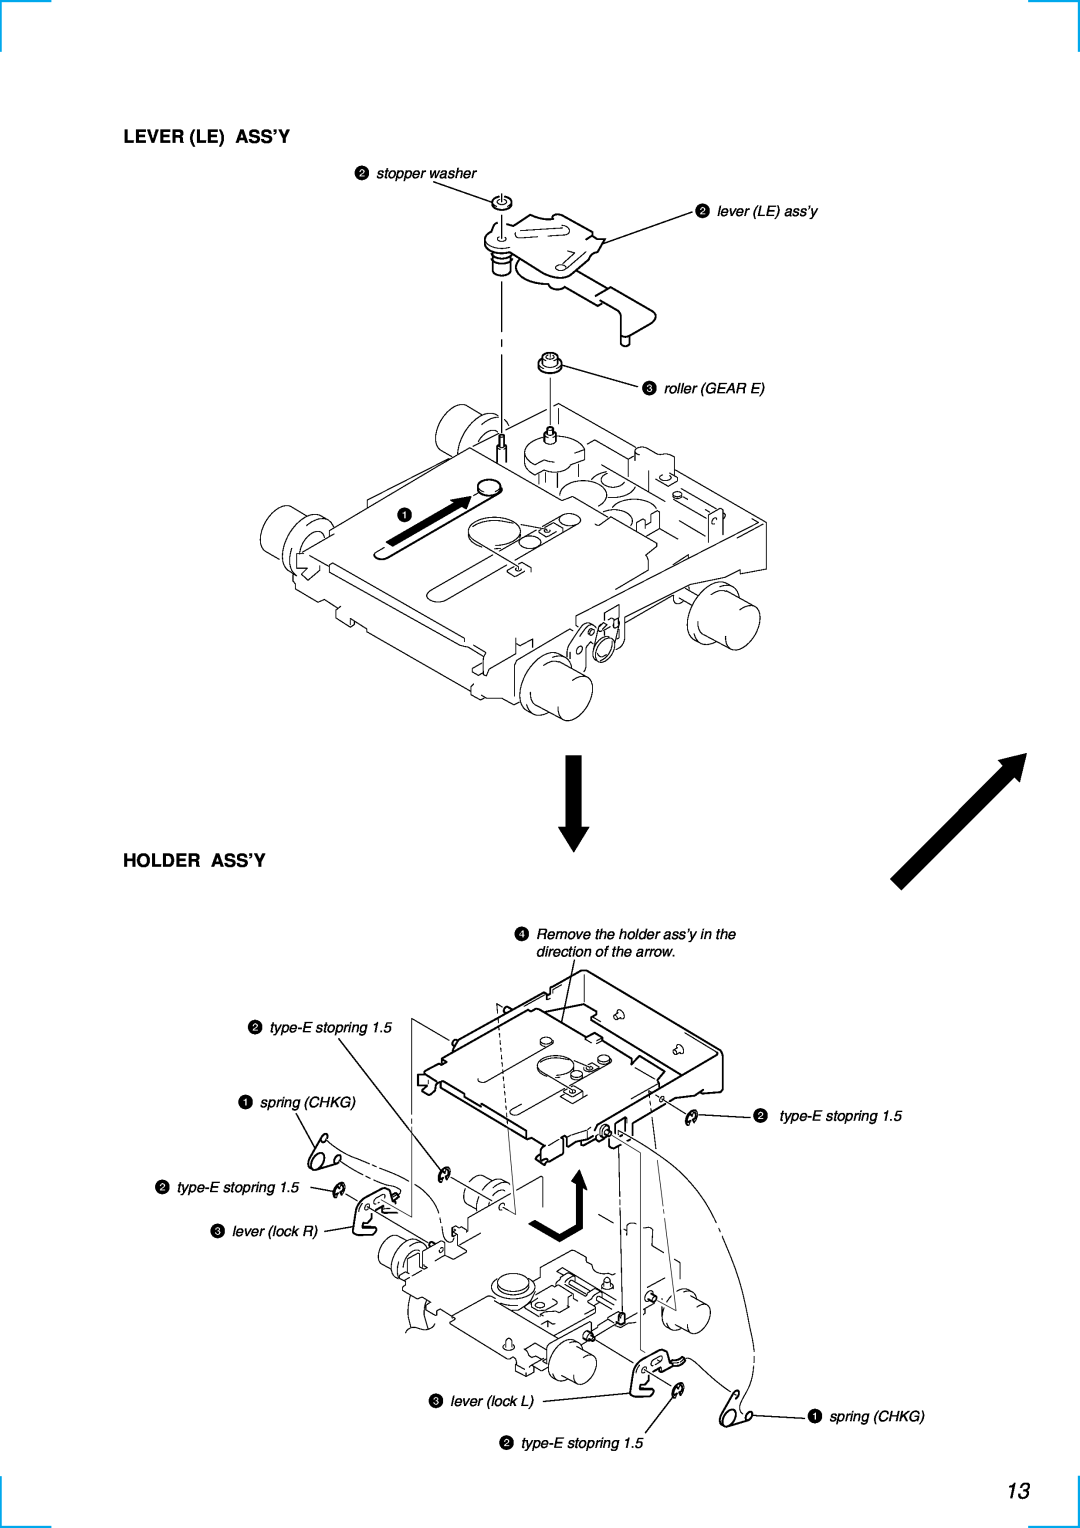 Sony MDX-C6500RX service manual Lever Le Ass’Y, Holder Ass’Y, 2stopper washer 2 lever LE ass’y 3 roller GEAR E 